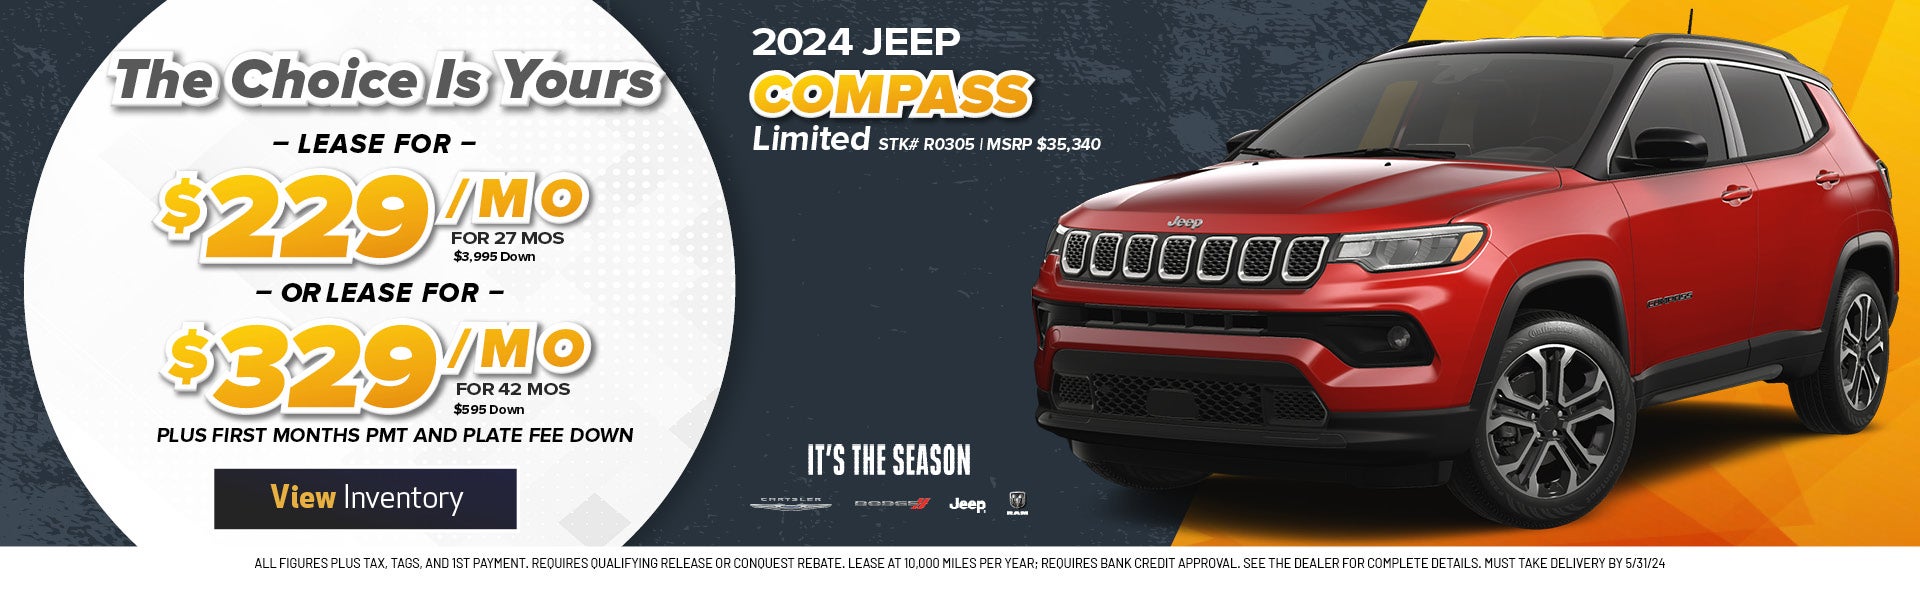 2024 Jeep Compass limited 